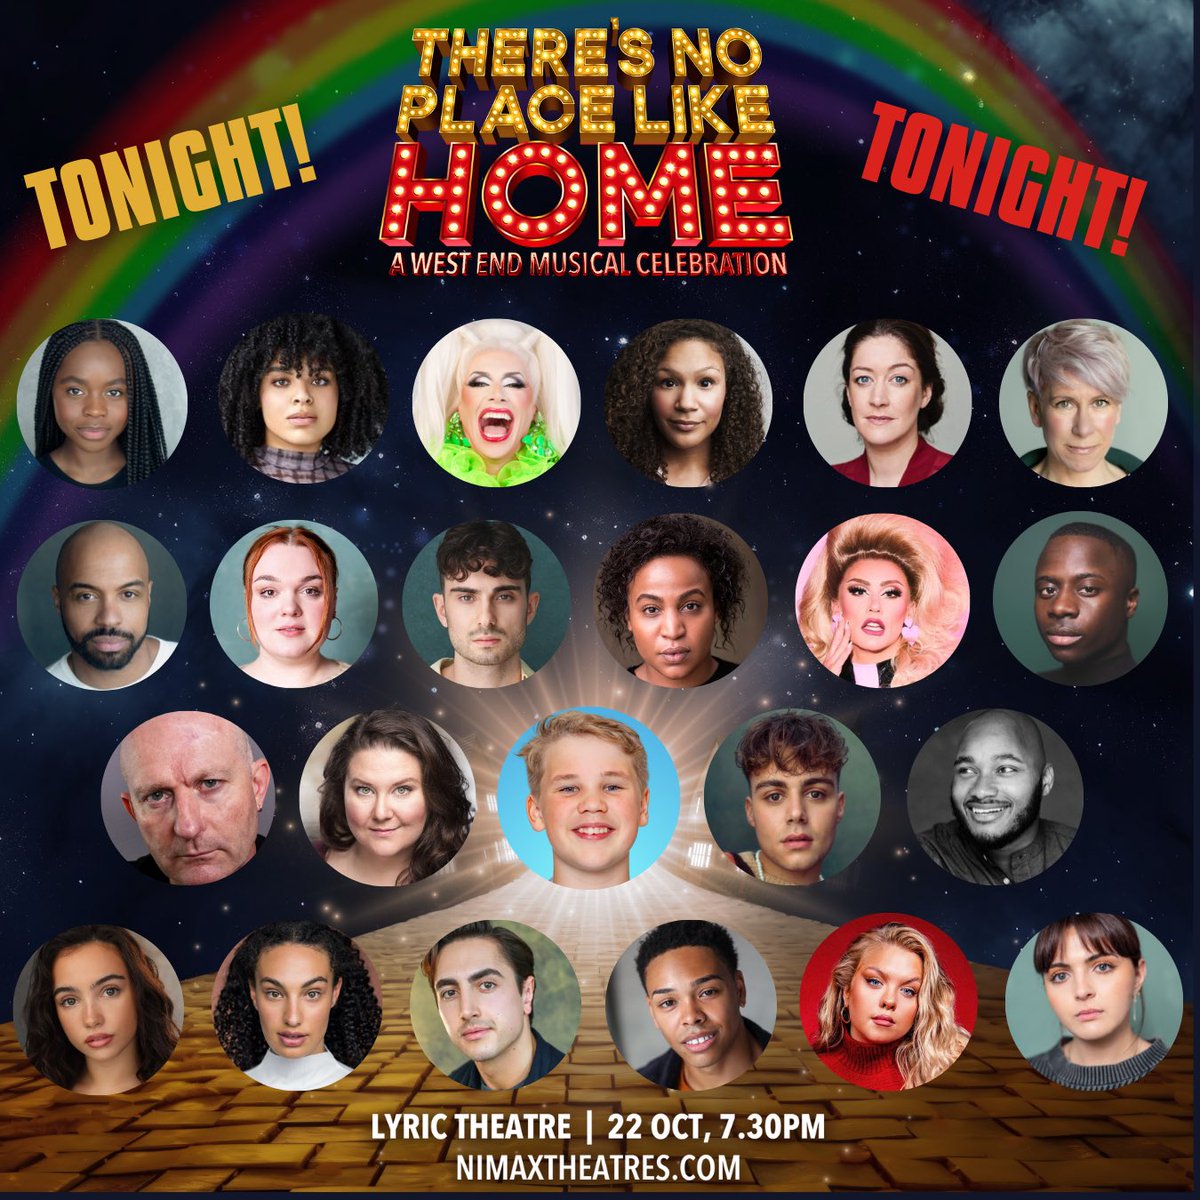 Tonight! Tonight! 🌈 There’s No Place Like Home - launching the Charlie Kristensen Foundation #cheerupcharlie this evening at the Lyric Theatre ✨